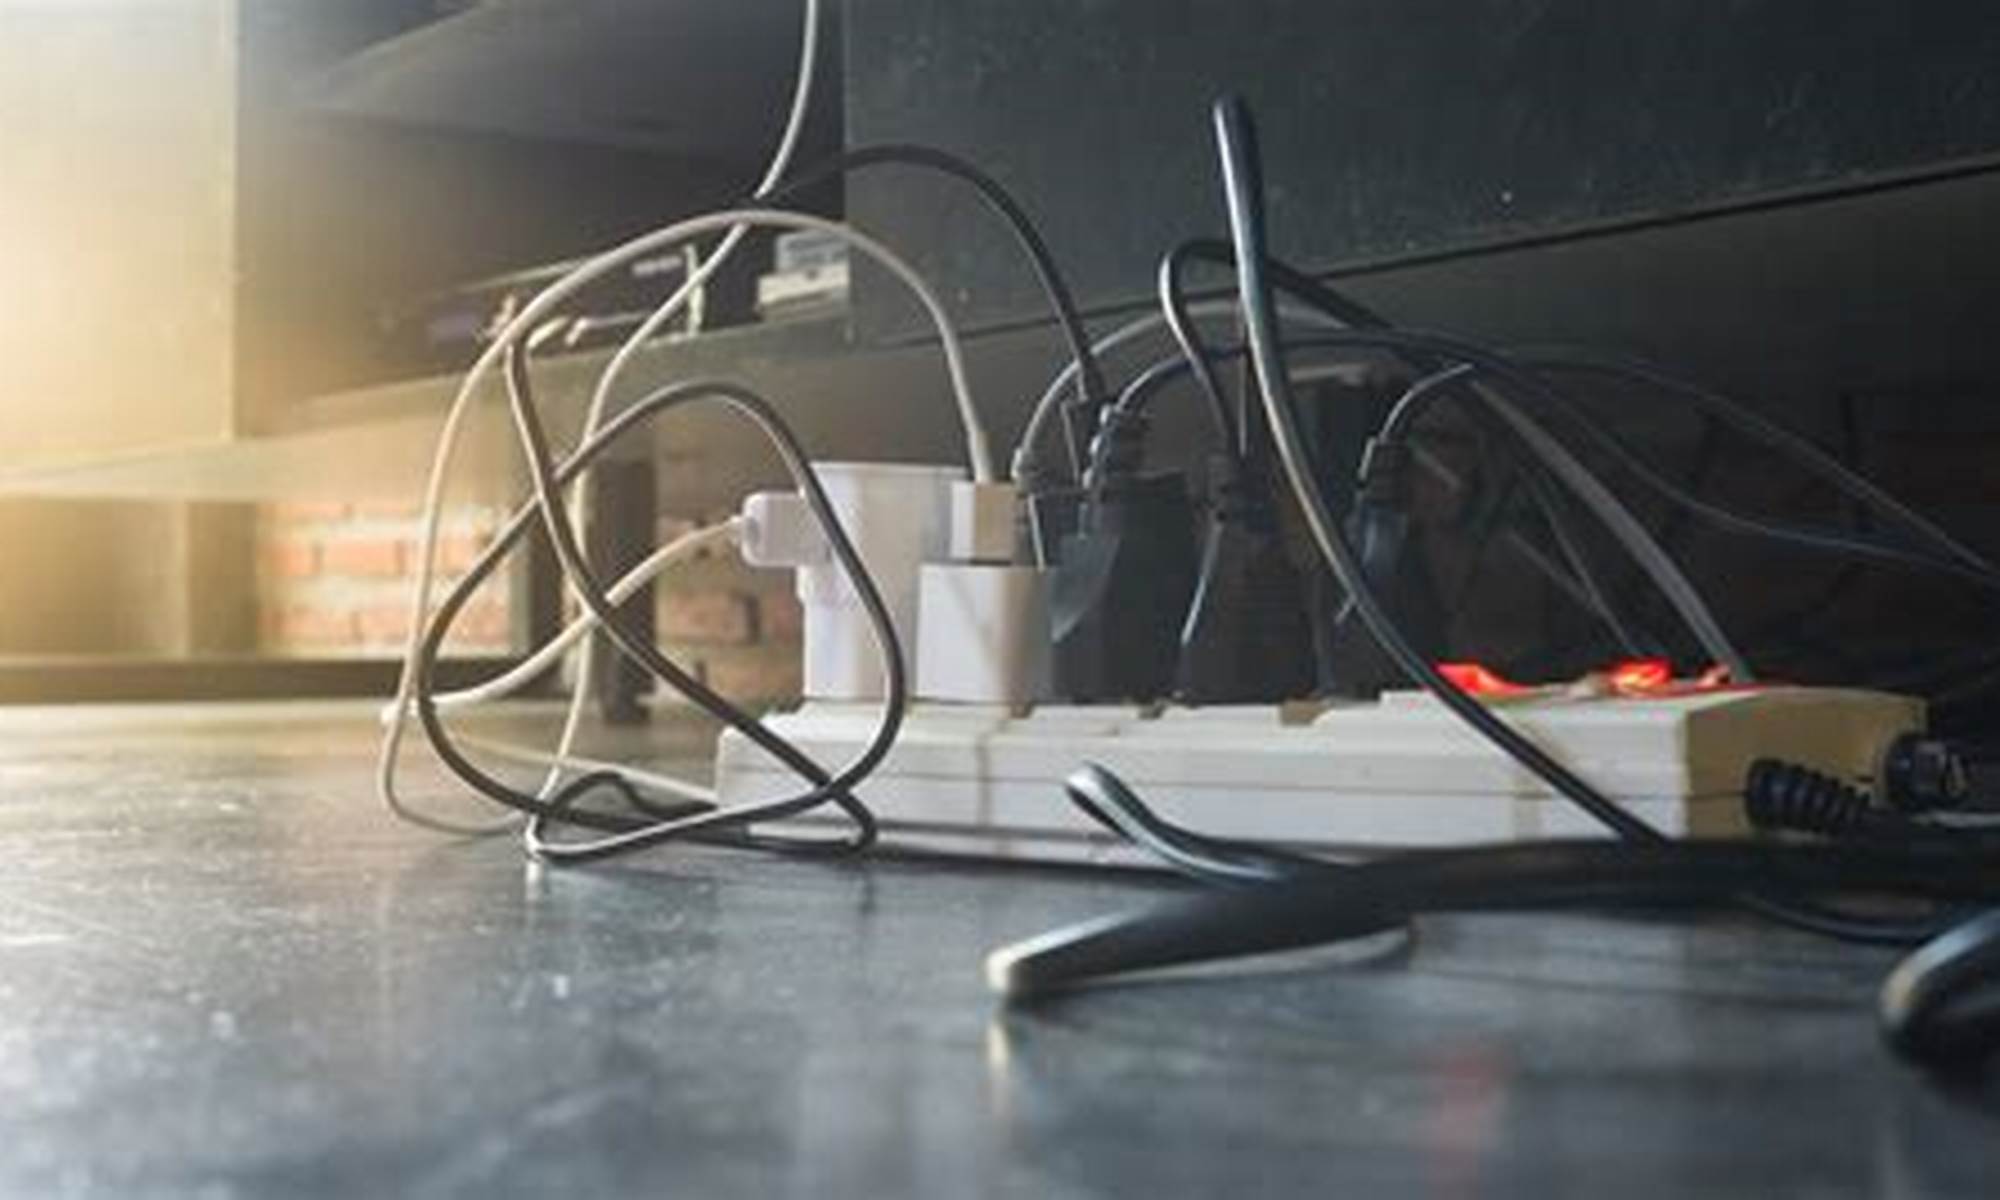 Electrical Hazards in the Workplace